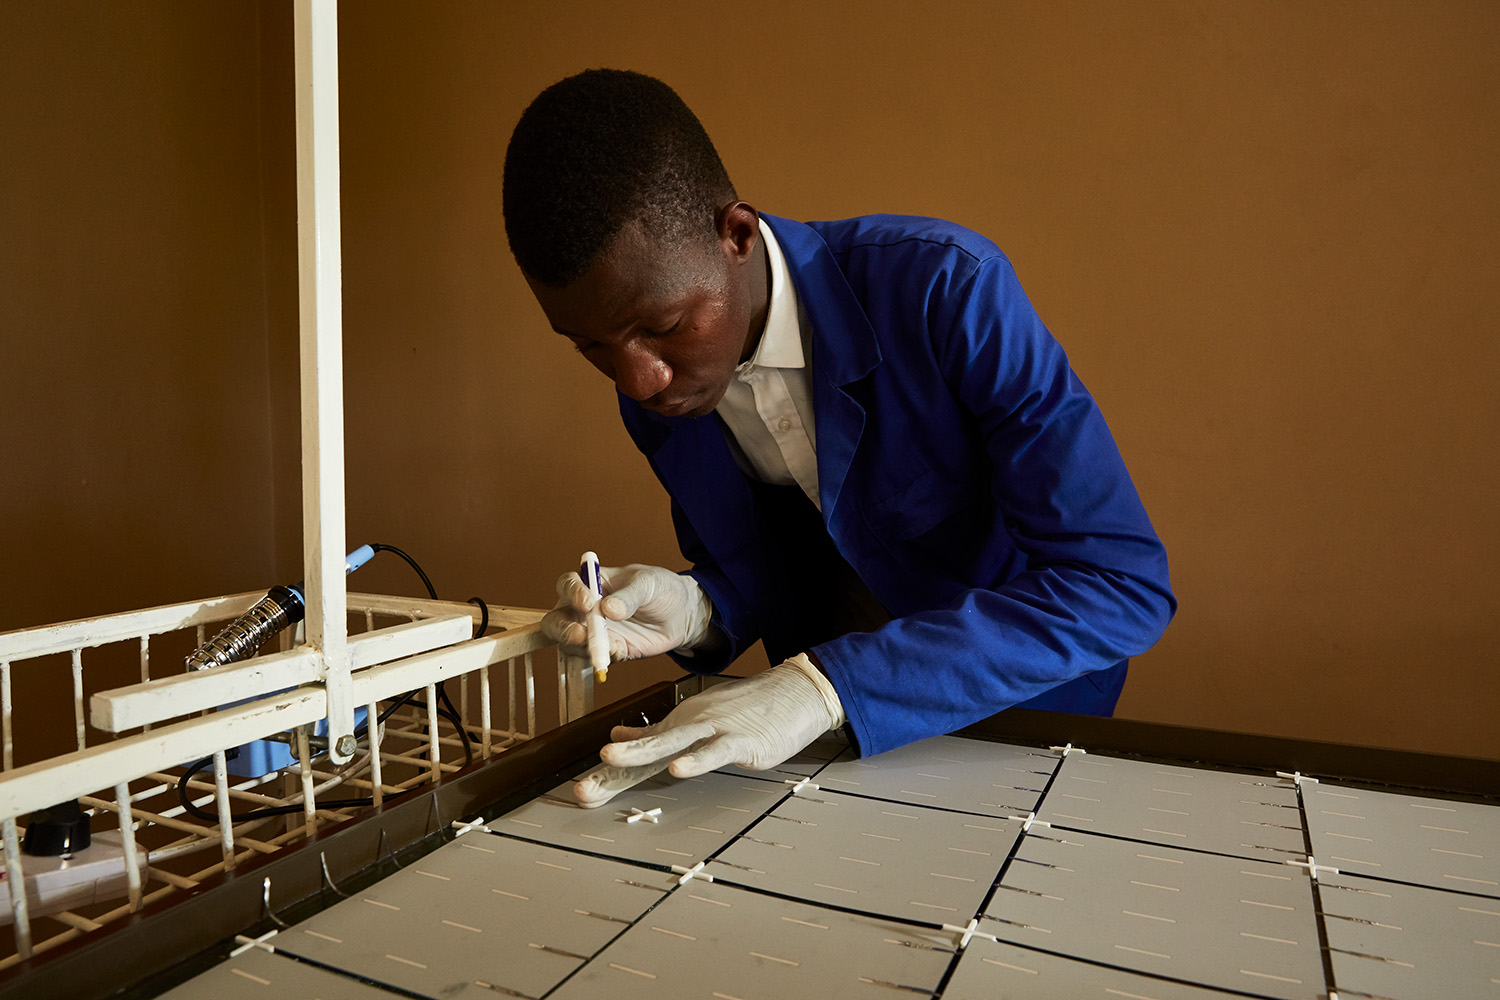  Thomas, a student at Green Malata, an entrepreneurial village, carefully solders metal strips to the back of a solar panel, Luchenza, Malawi, 2017.  Thomas and his fellow students are part of Green Malata’s Renewable Energy course, during which they